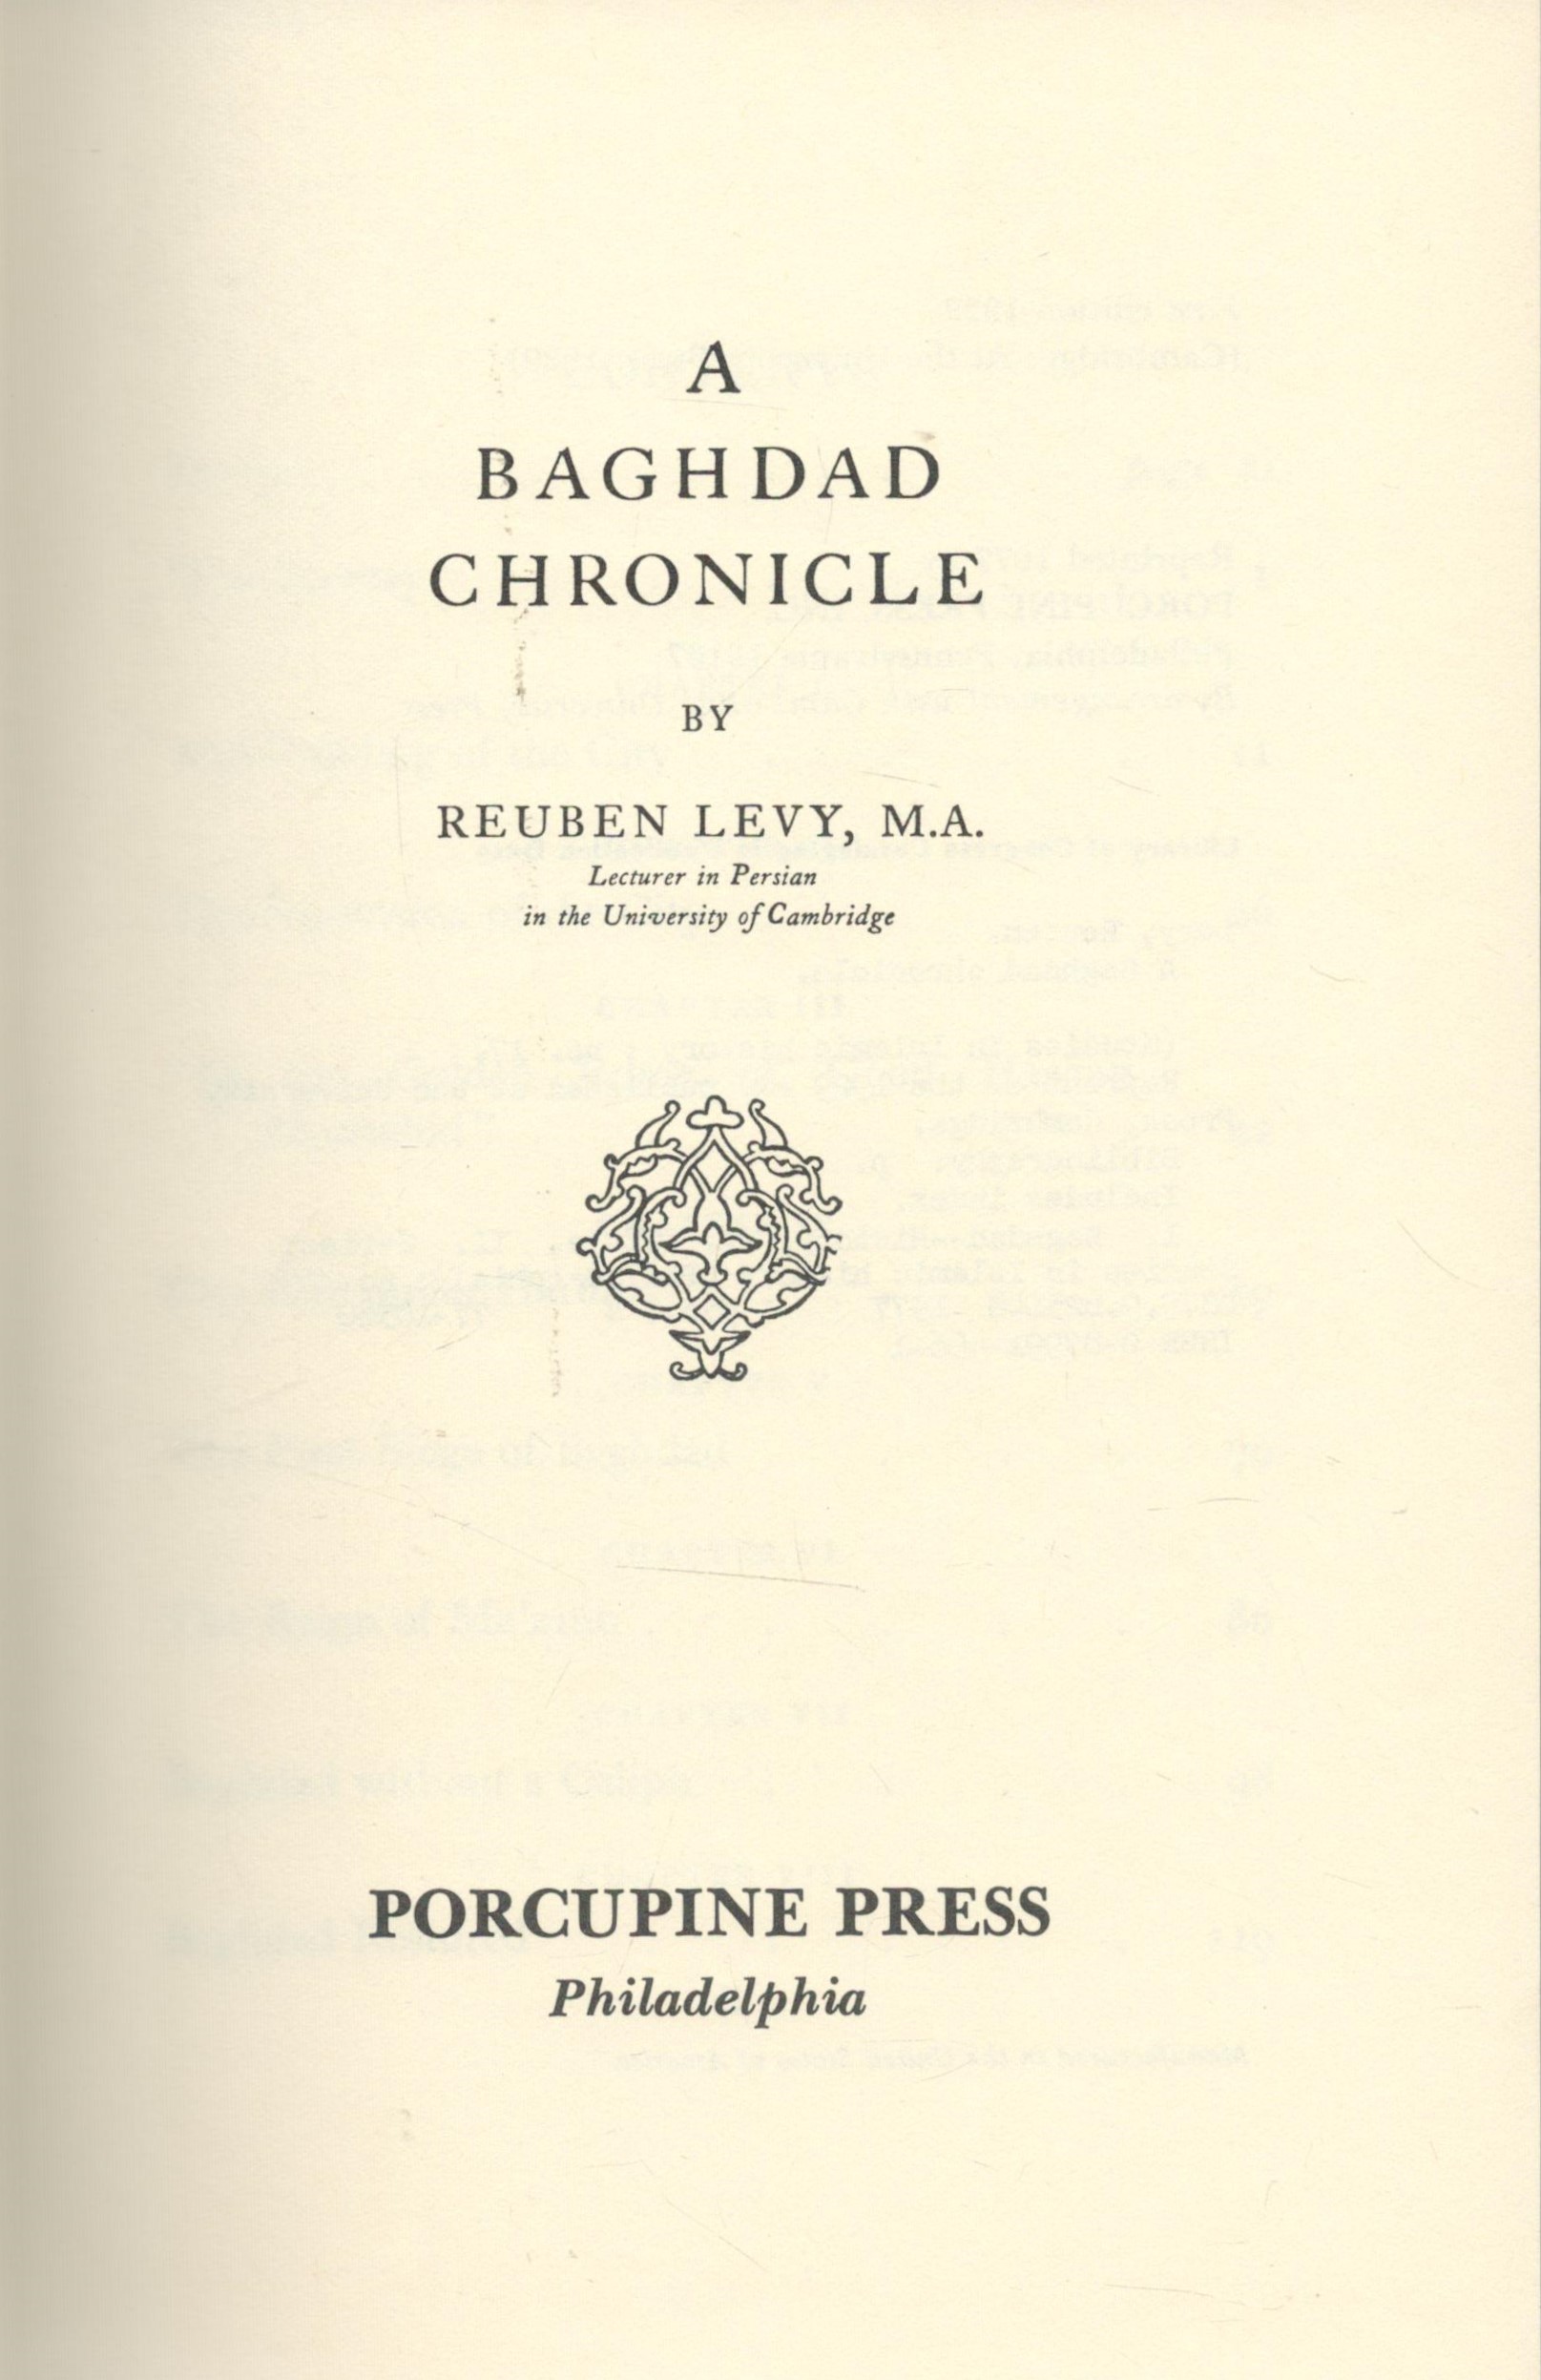 A Baghdad Chronicle by Reuben Levy 1977 edition unknown Hardback Book with 273 pages published by - Image 2 of 3